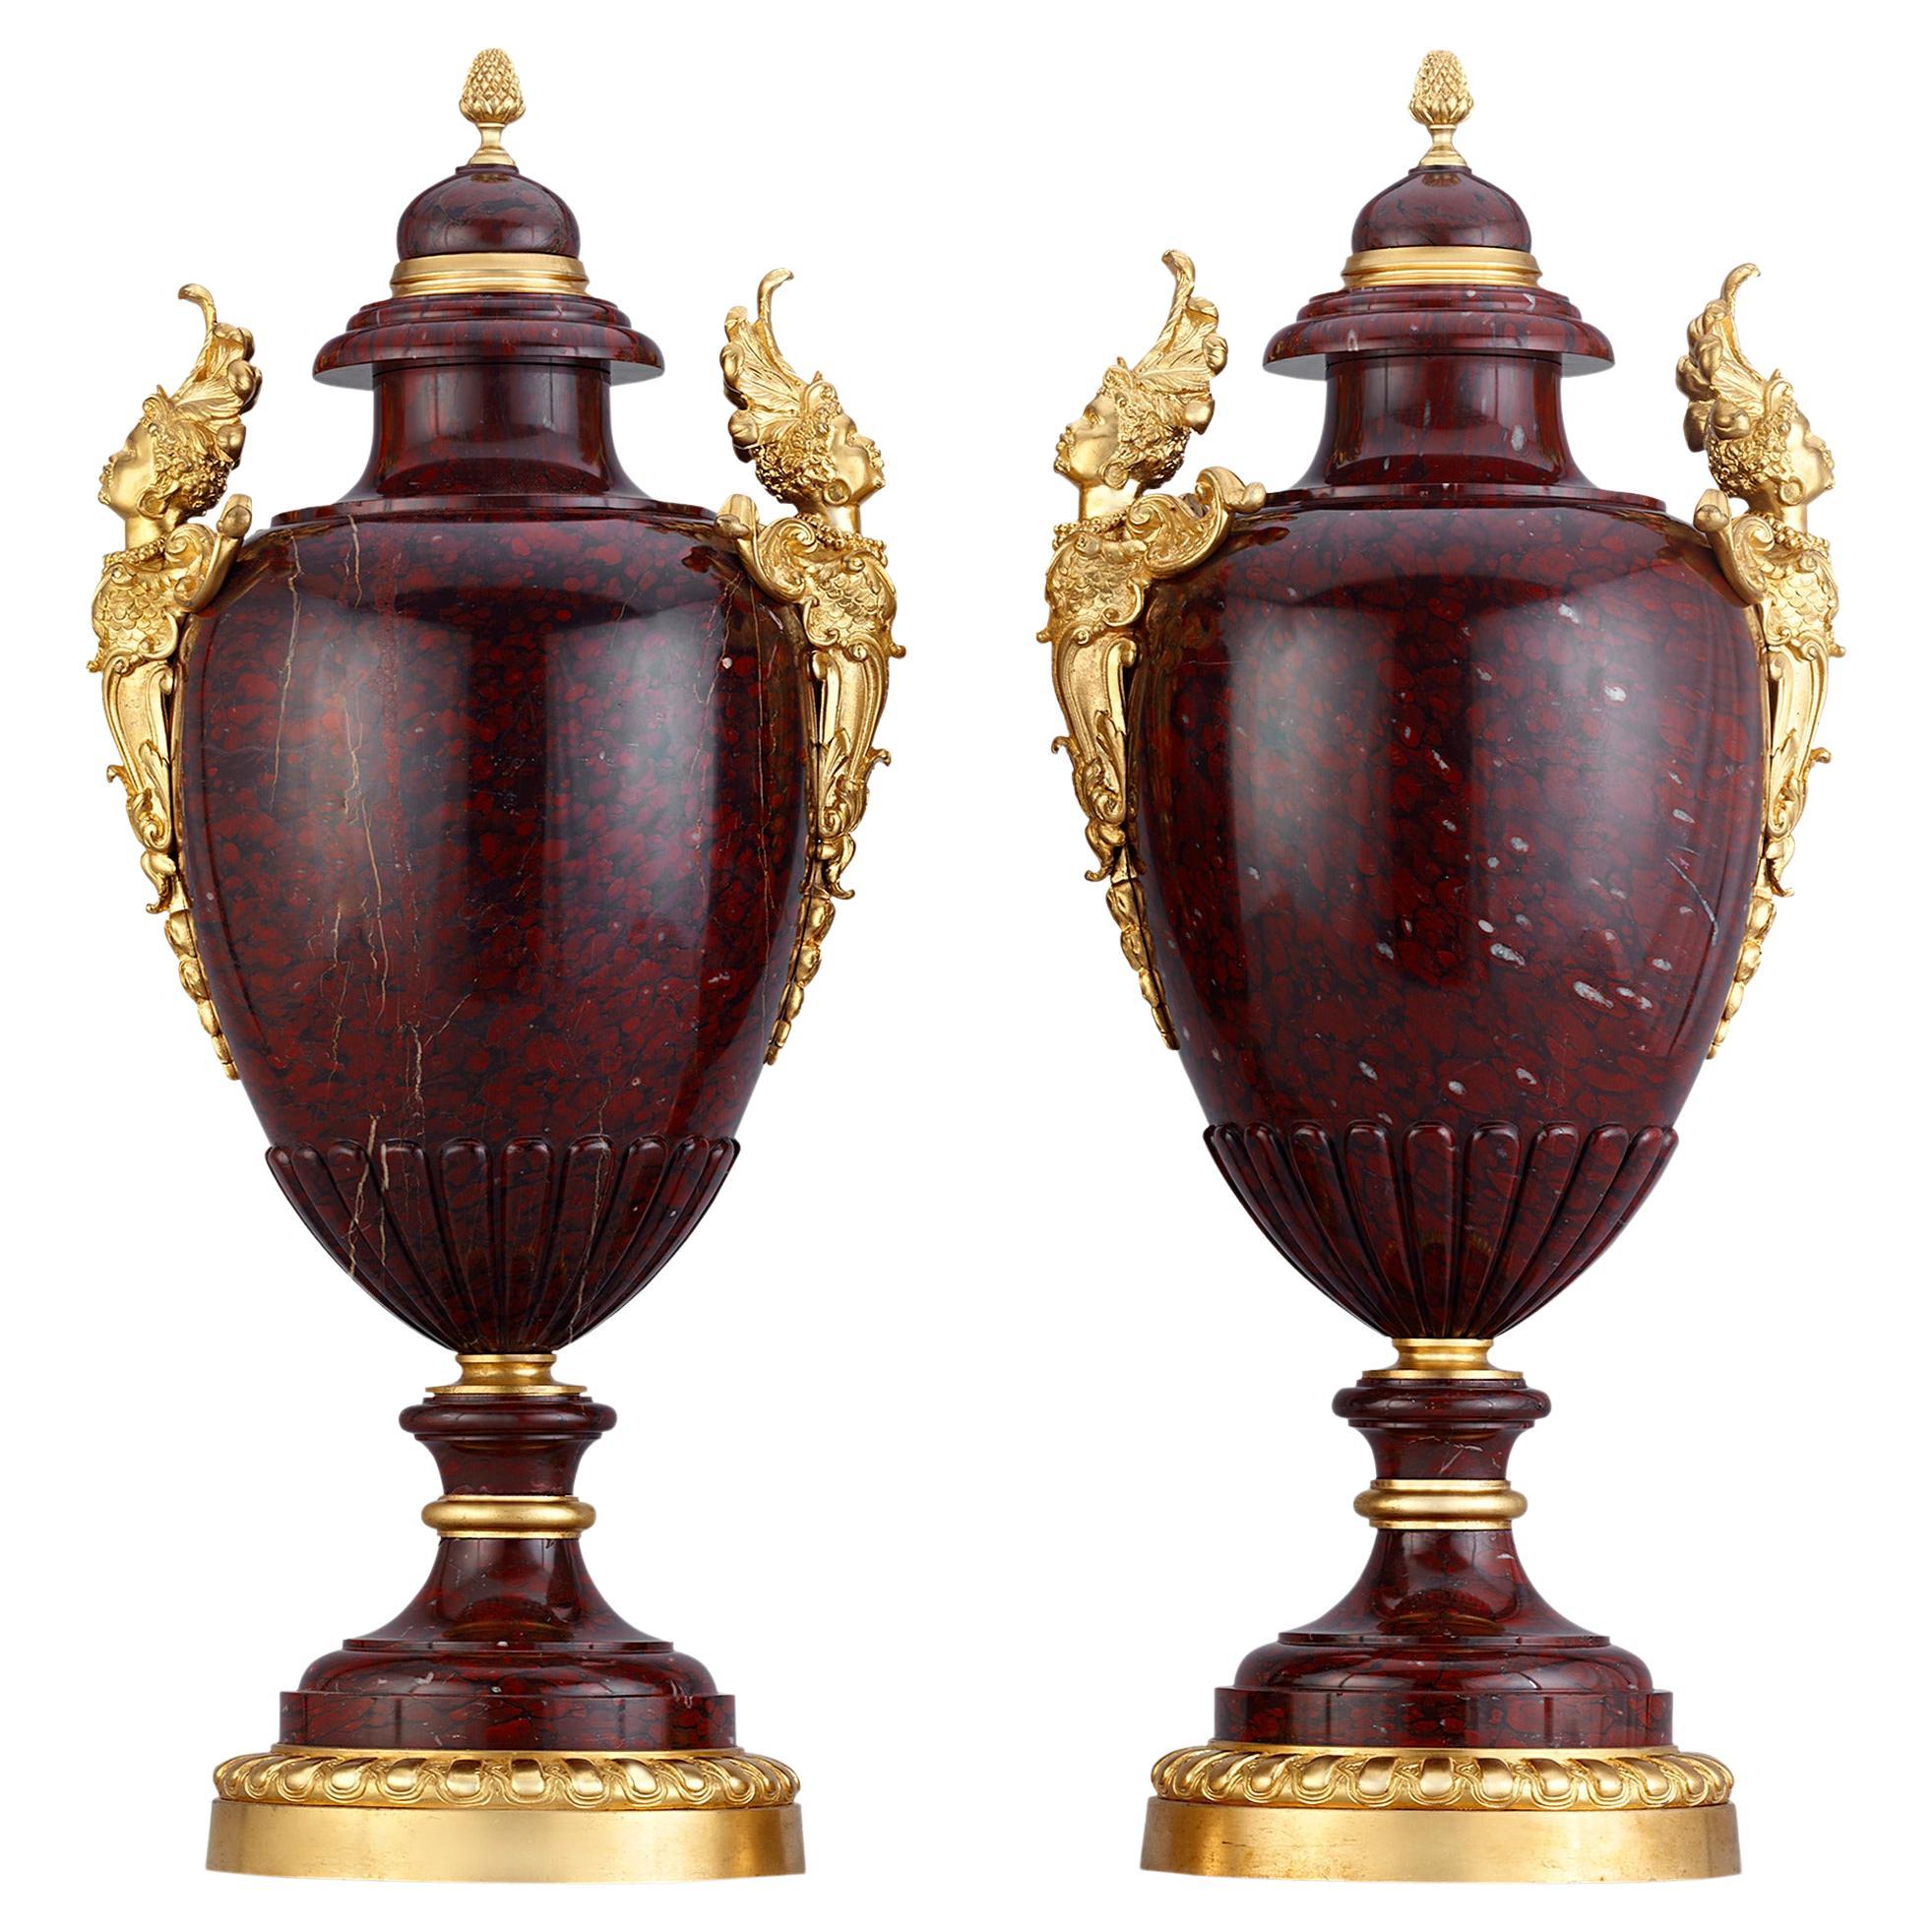 Griotte Rouge Vases Attributed to Charles-henri-Joseph Cordier